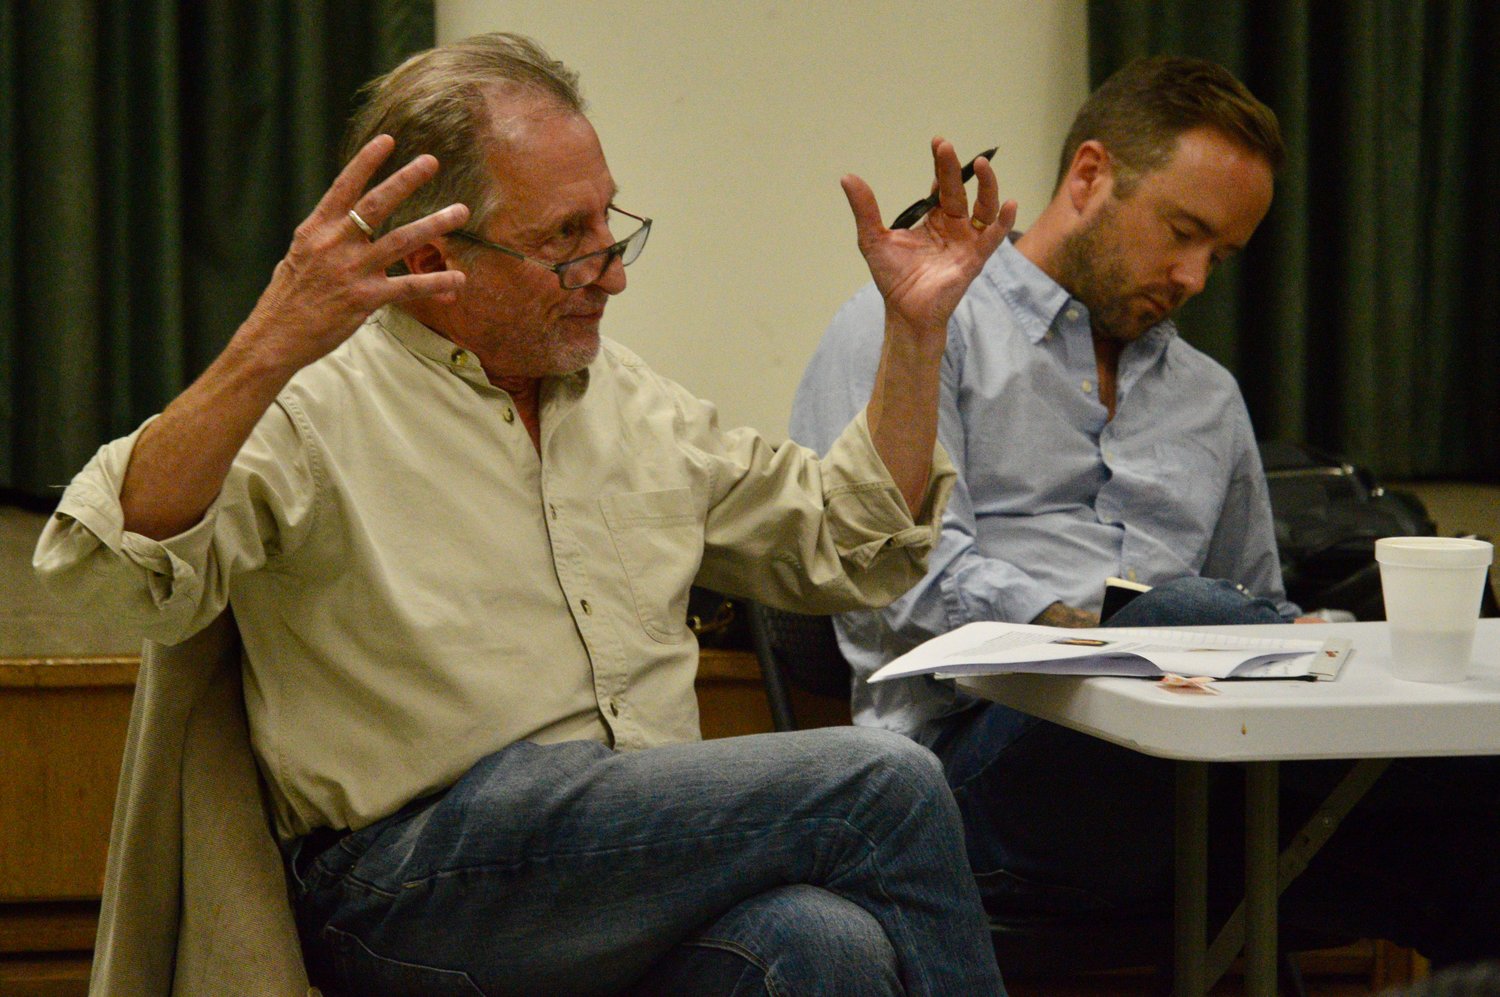 David Blistein, a writer and associate producer on Ken Burns’ team, makes a point while speaking to members of Every Student Initiative. At right is Chris Ewers, co-director of the upcoming three-part film that will focus on mental health issues.